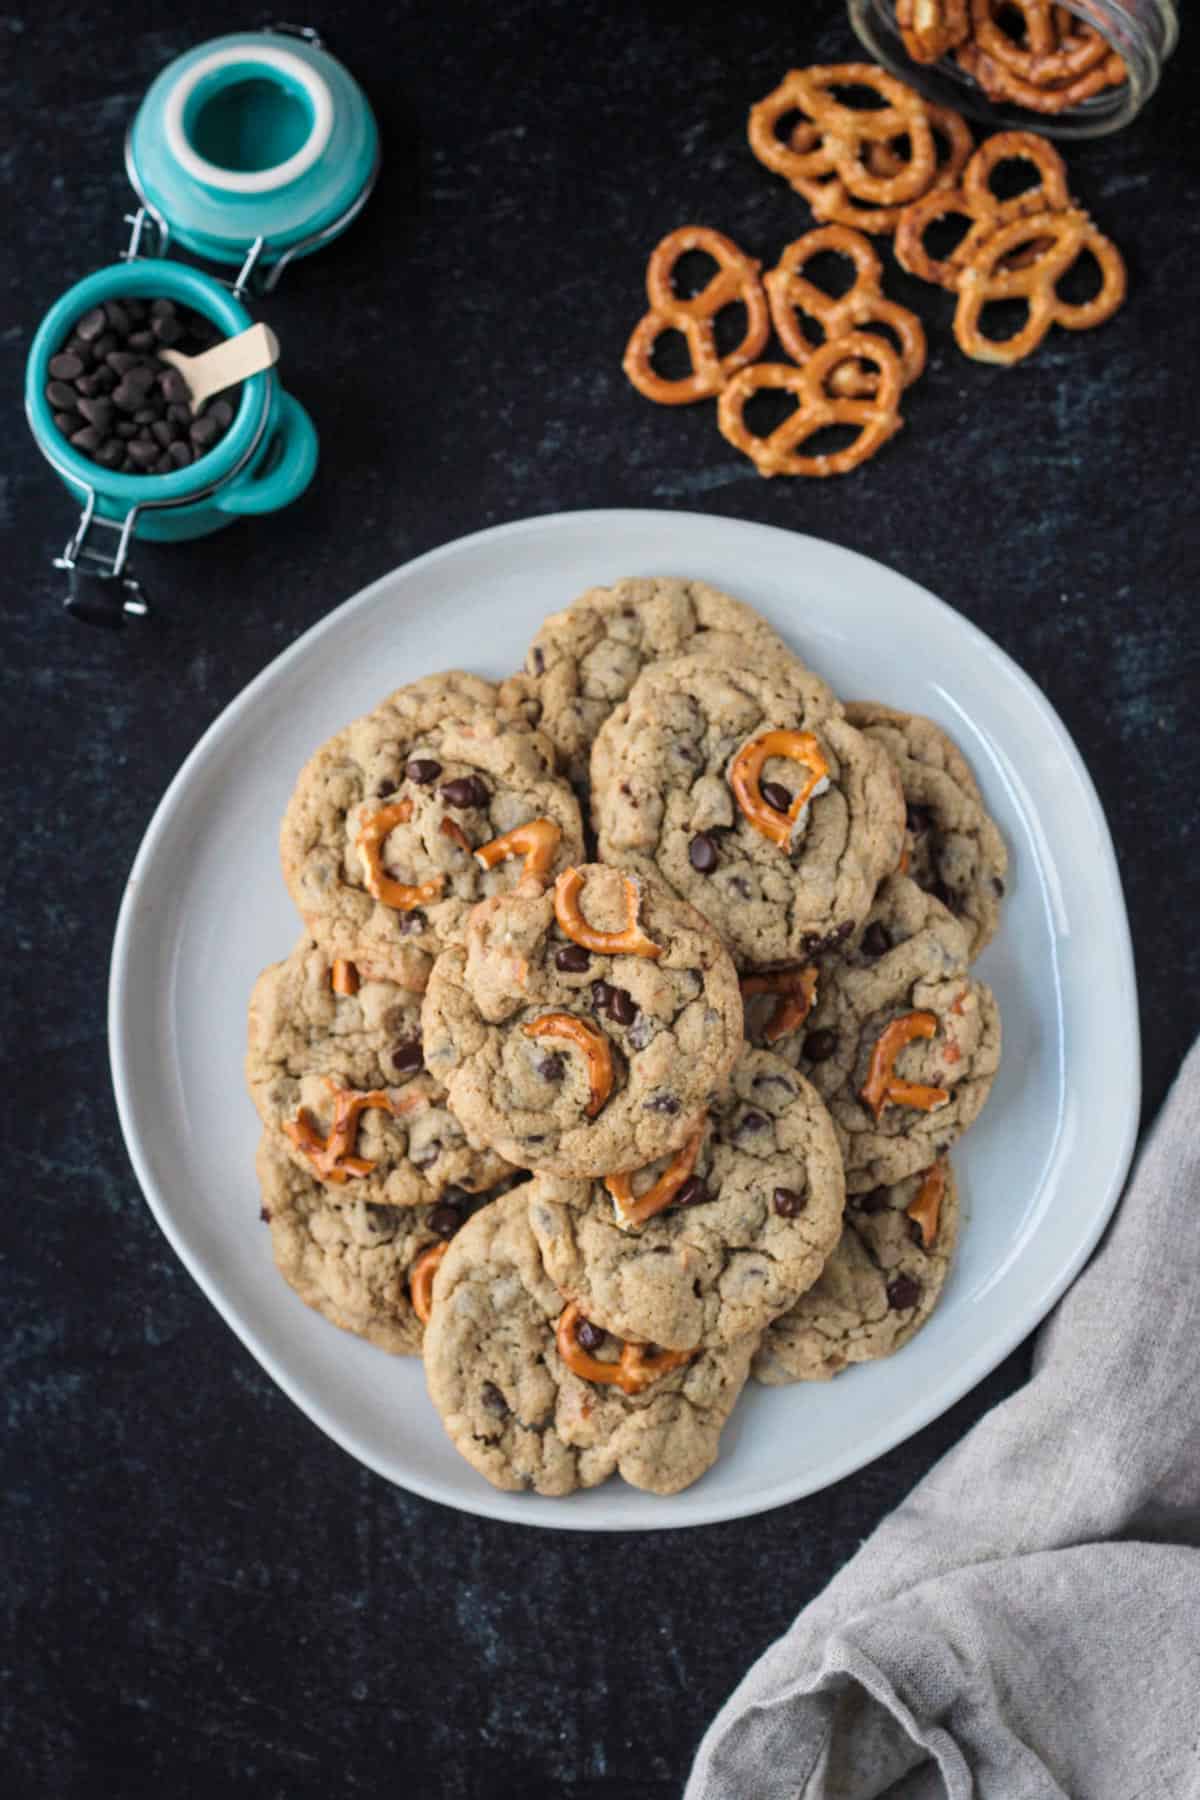 Pile of vegan chocolate chip cookies with pretzels on a plate.